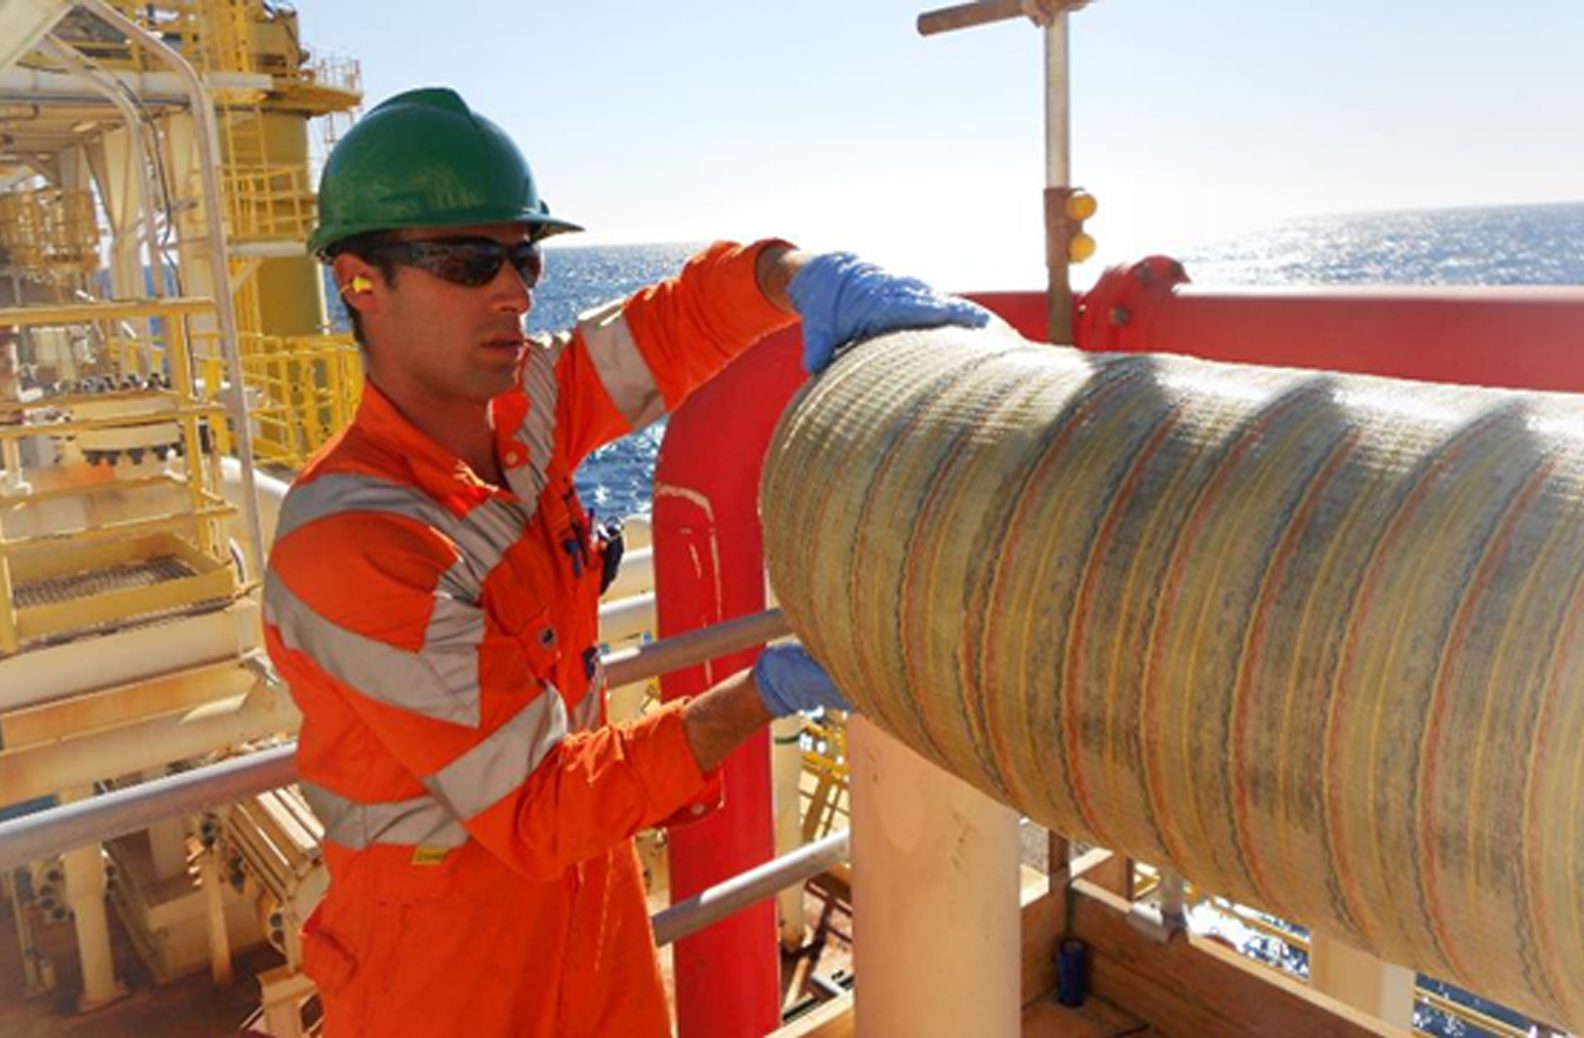 Technician applying composite wrap to pipe offshore in sunshine